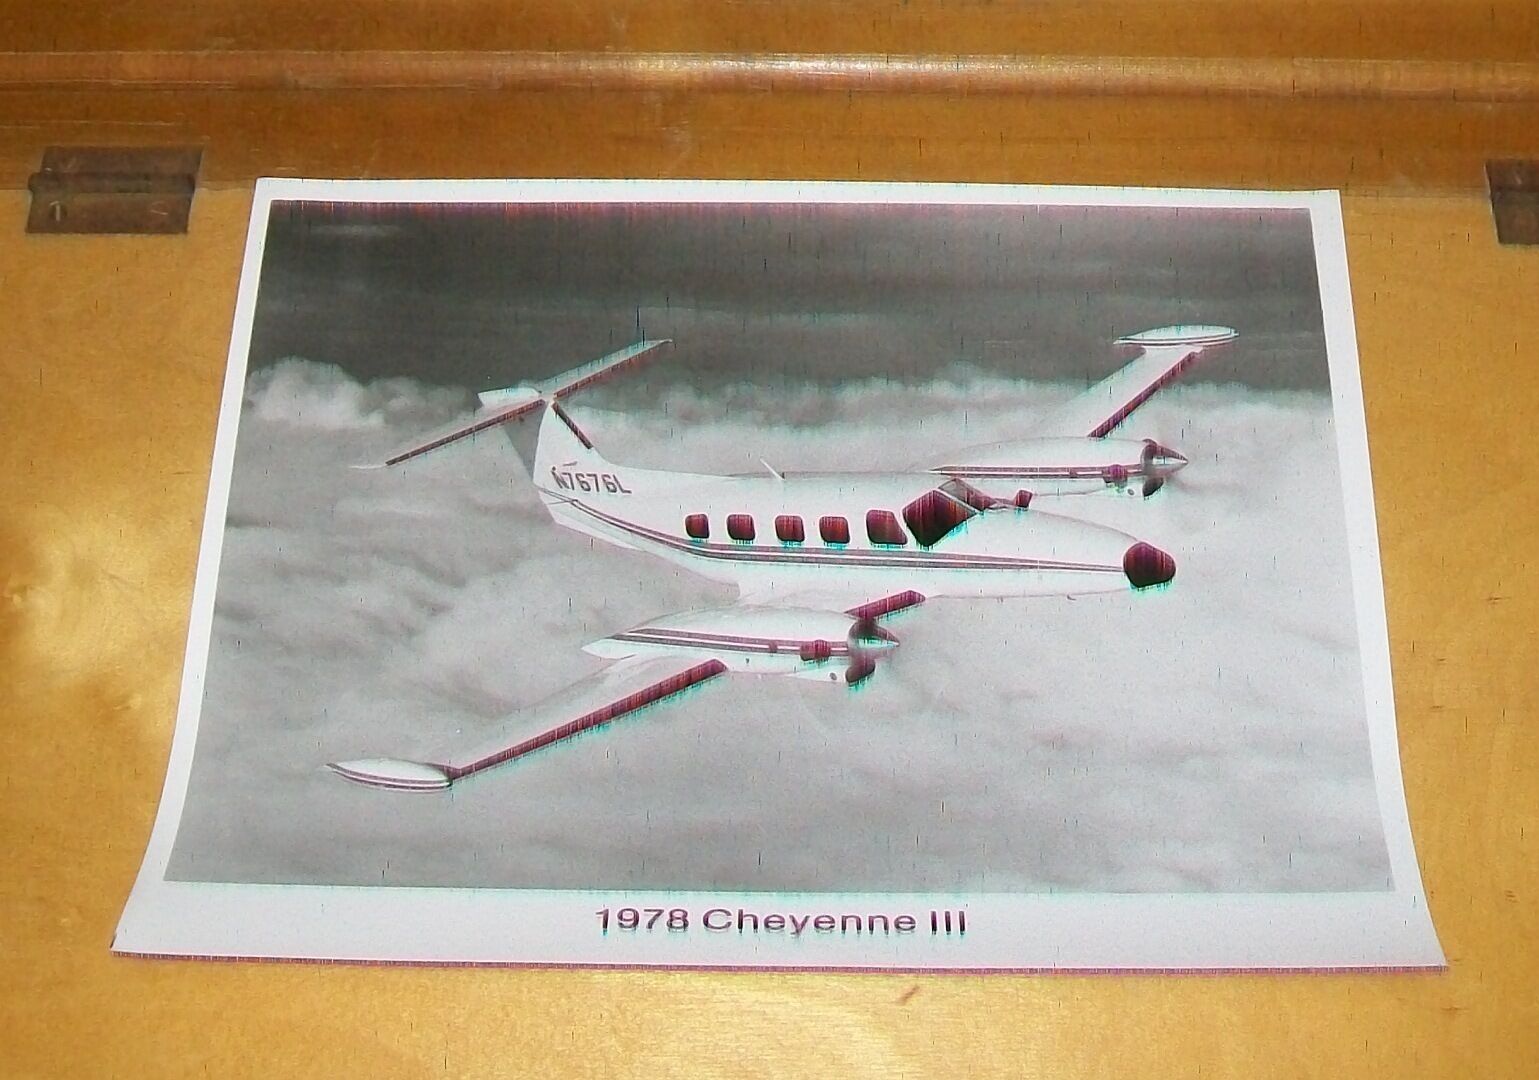 PIPER CHEYENNE III 1978 PIPER AIRCRAFT OFFICIAL PRESS PHOTOGRAPH